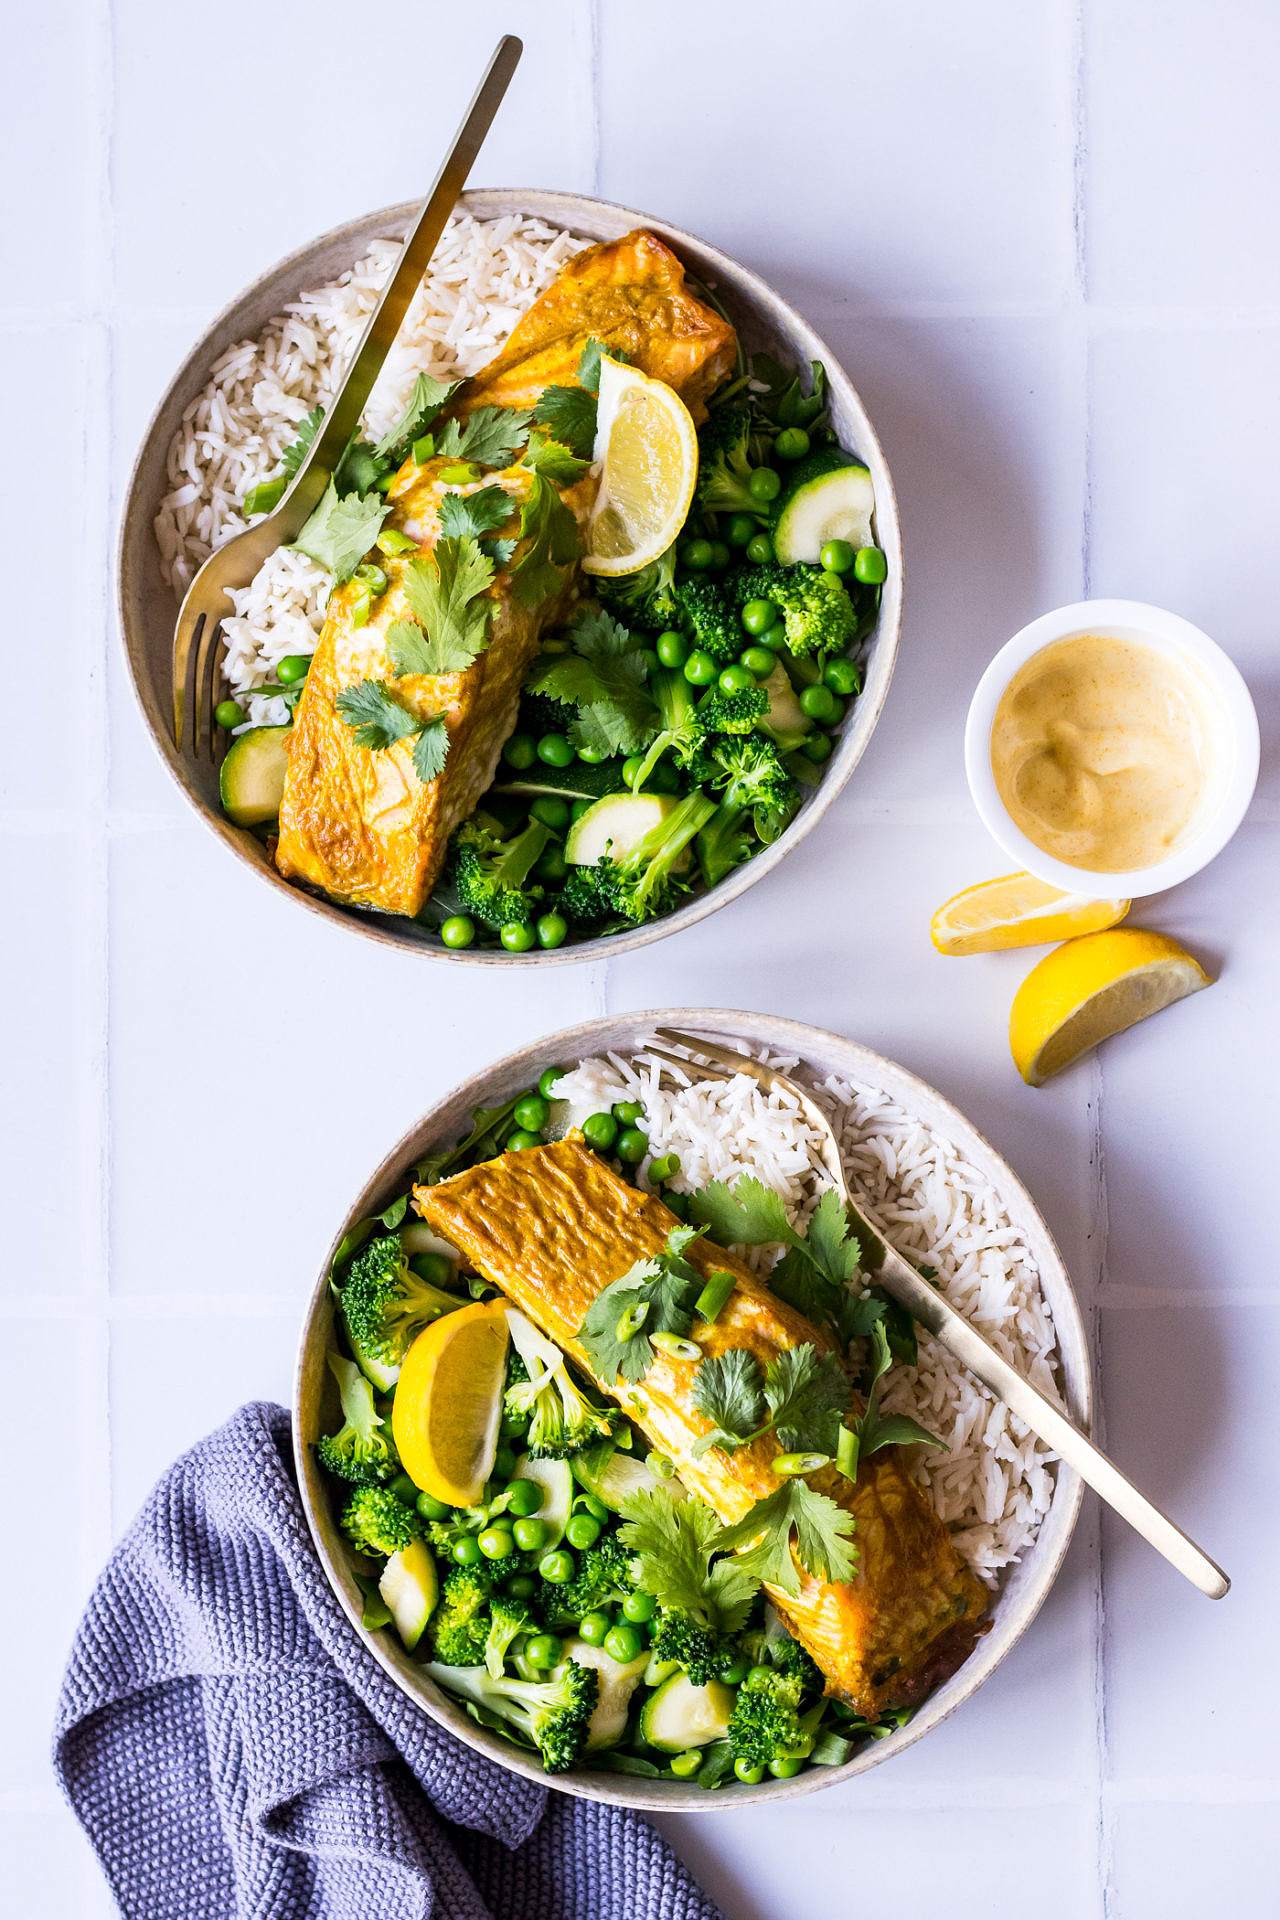 Two bowls with white rice, green vegetables and curry baked salmon garnished with lemon and coriander